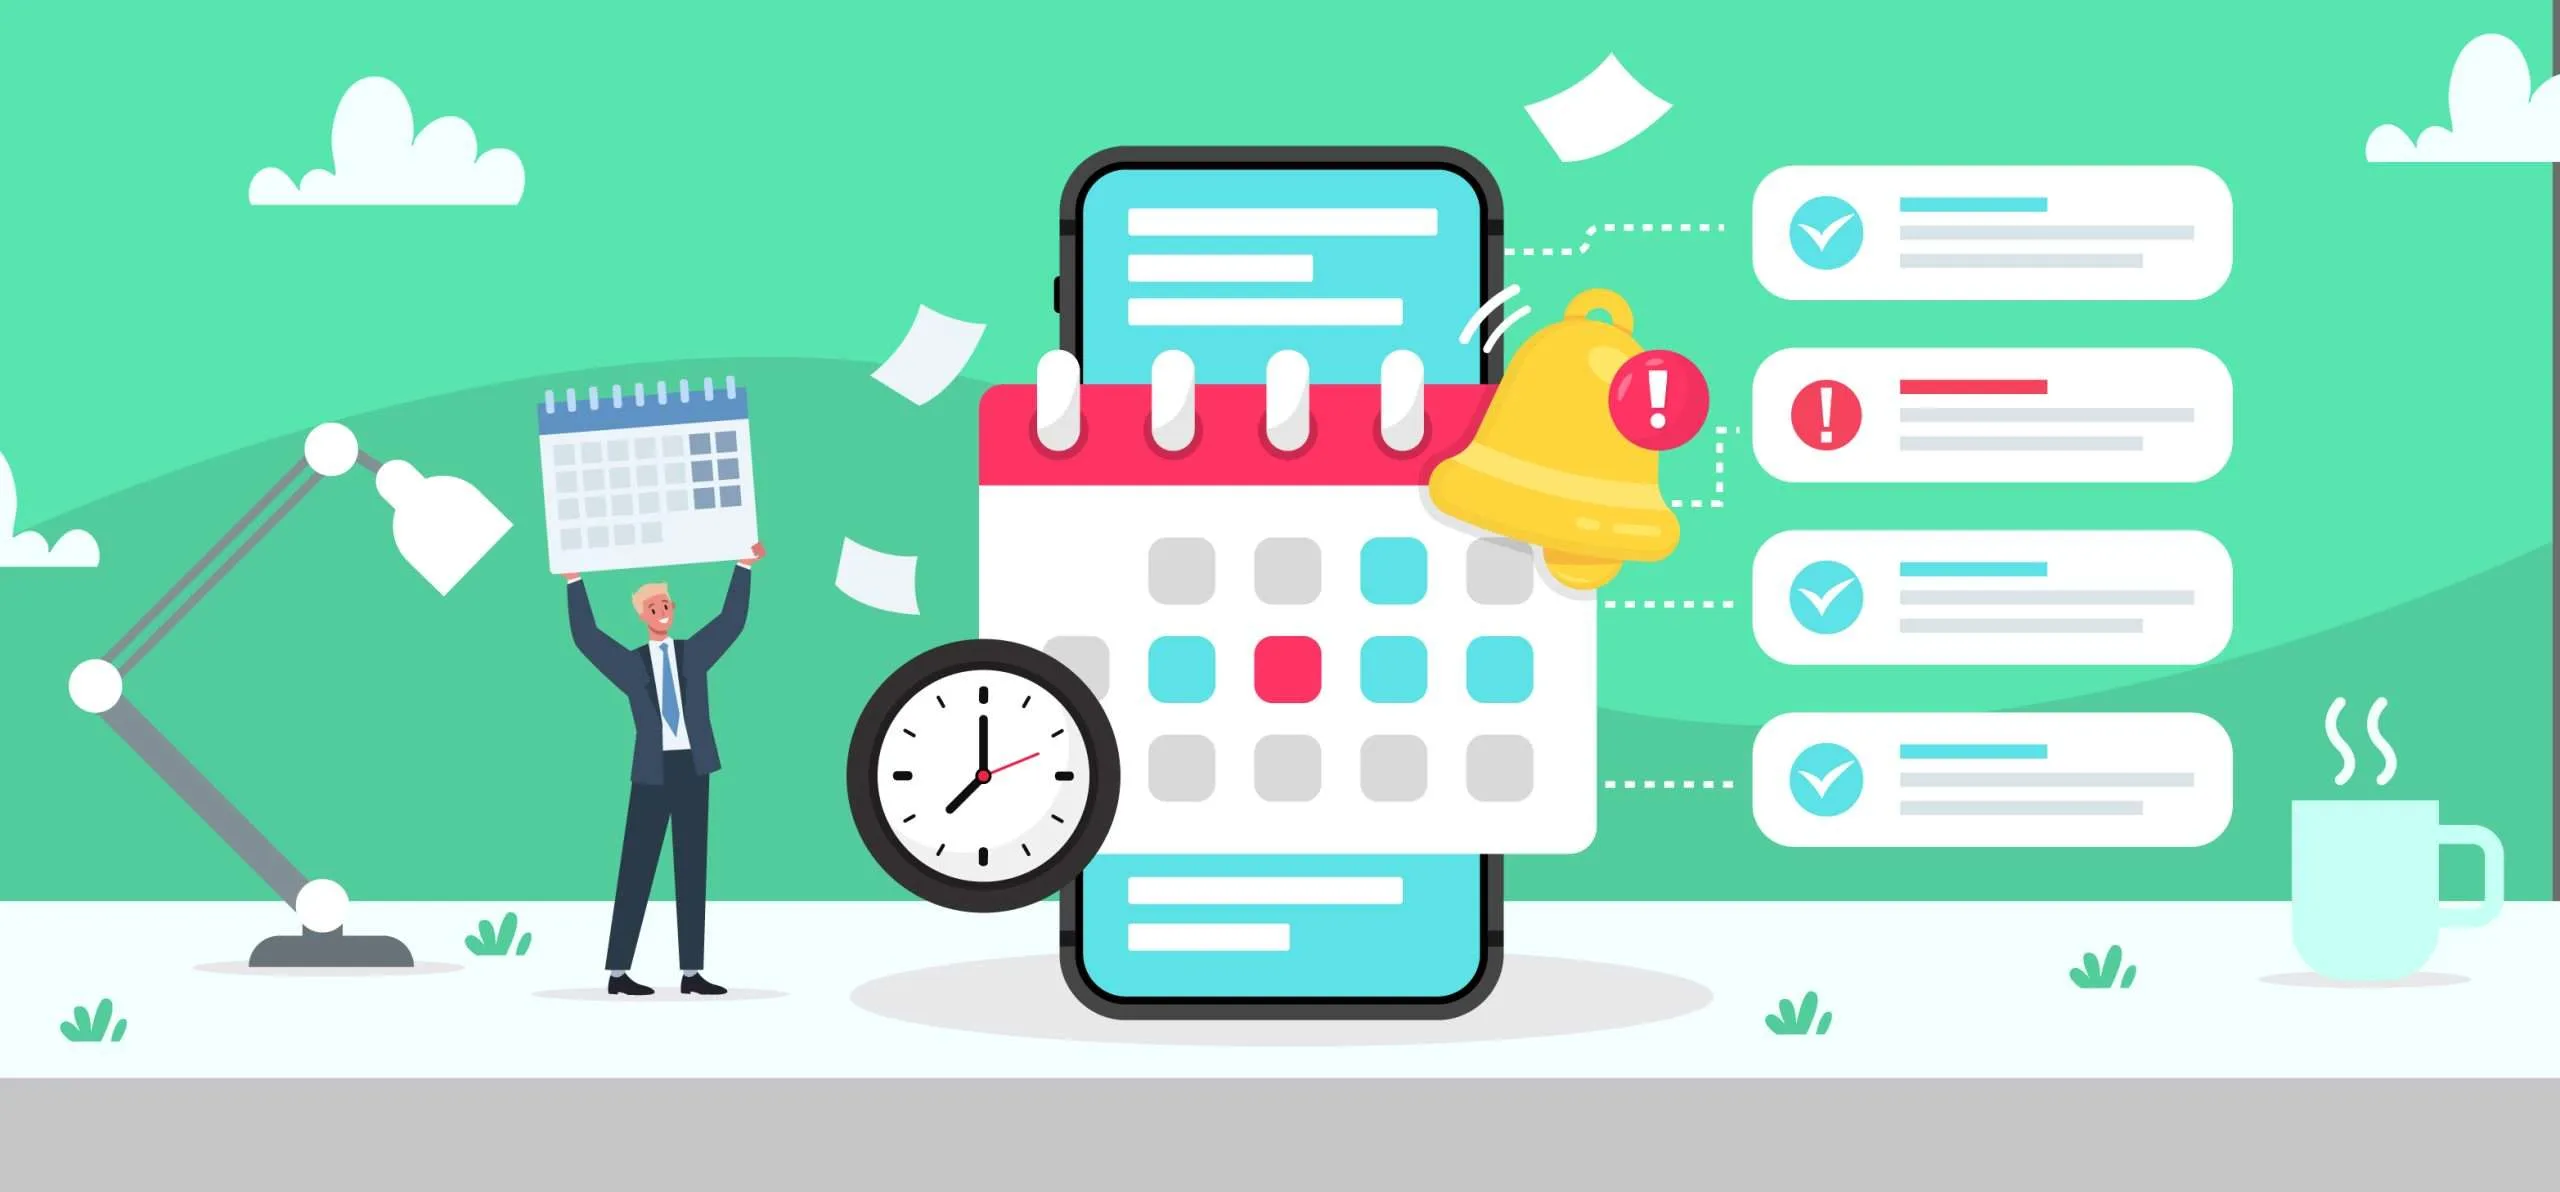 BP Best schedule planner apps tools and software